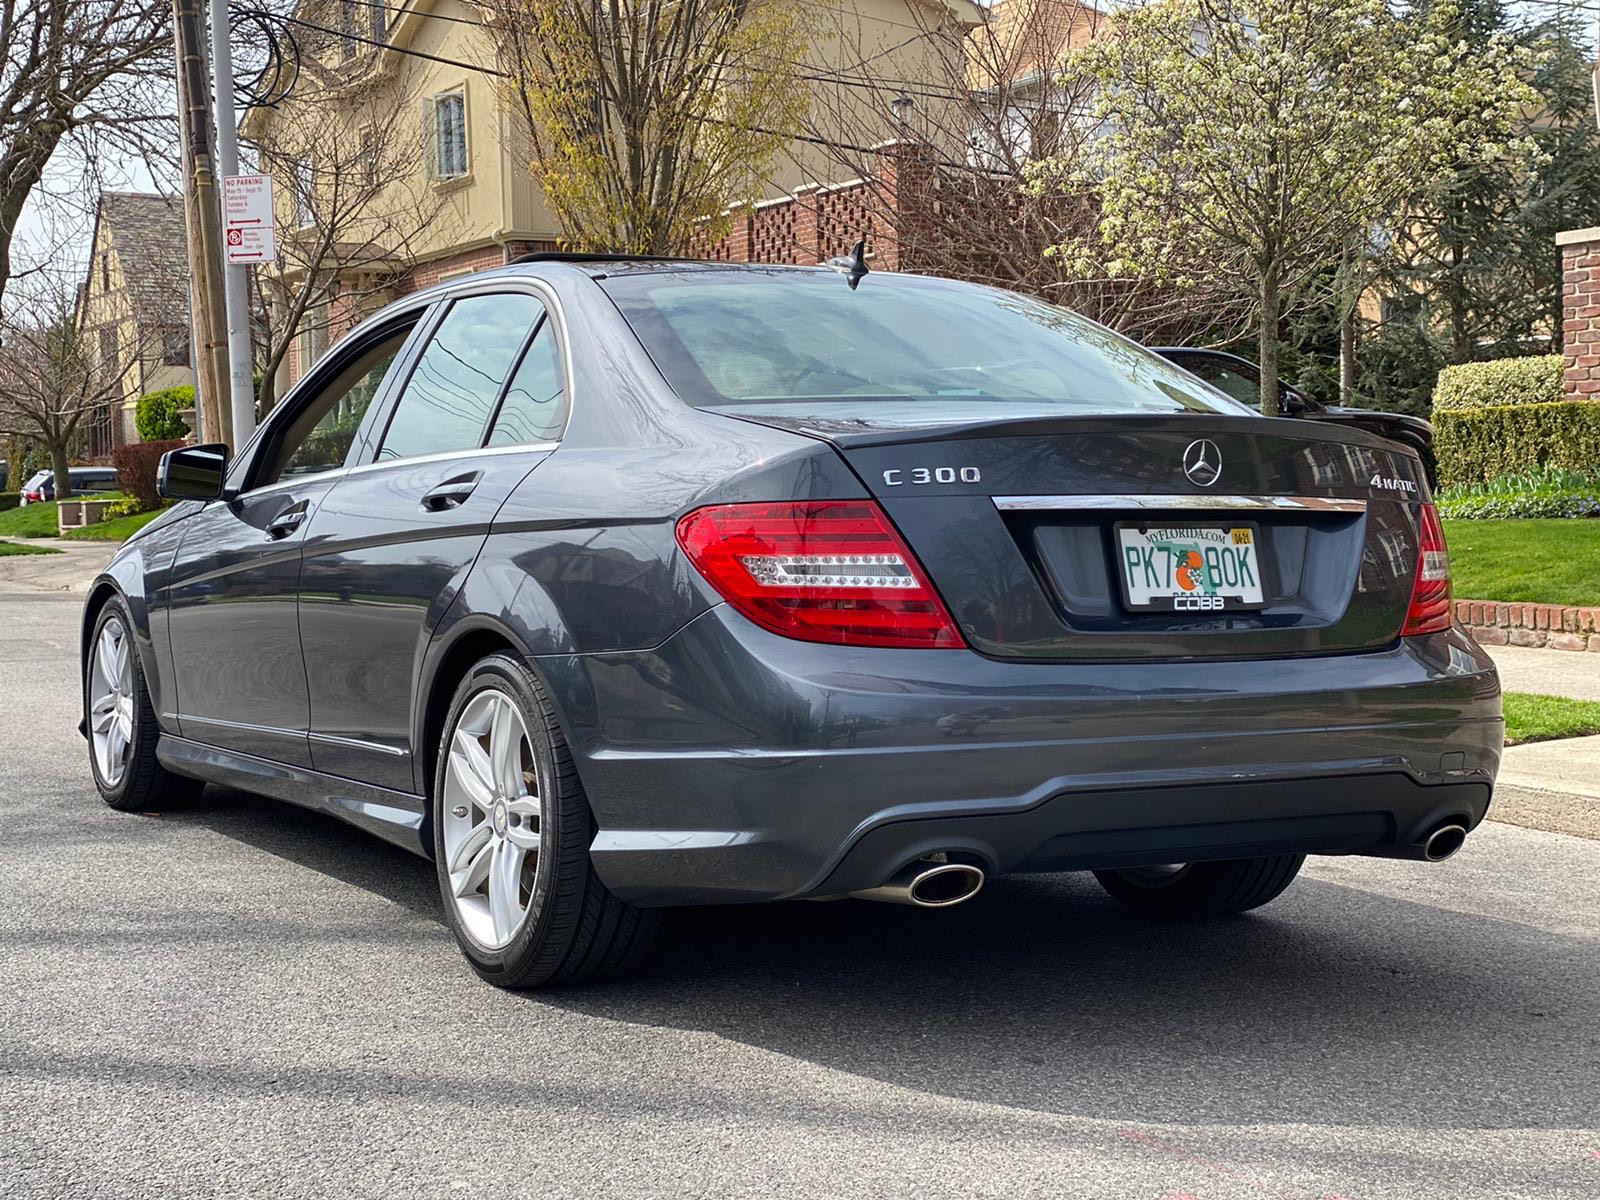 Used - Mercedes-Benz C 300 Luxury 4MATIC AWD Sedan for sale in Staten Island NY